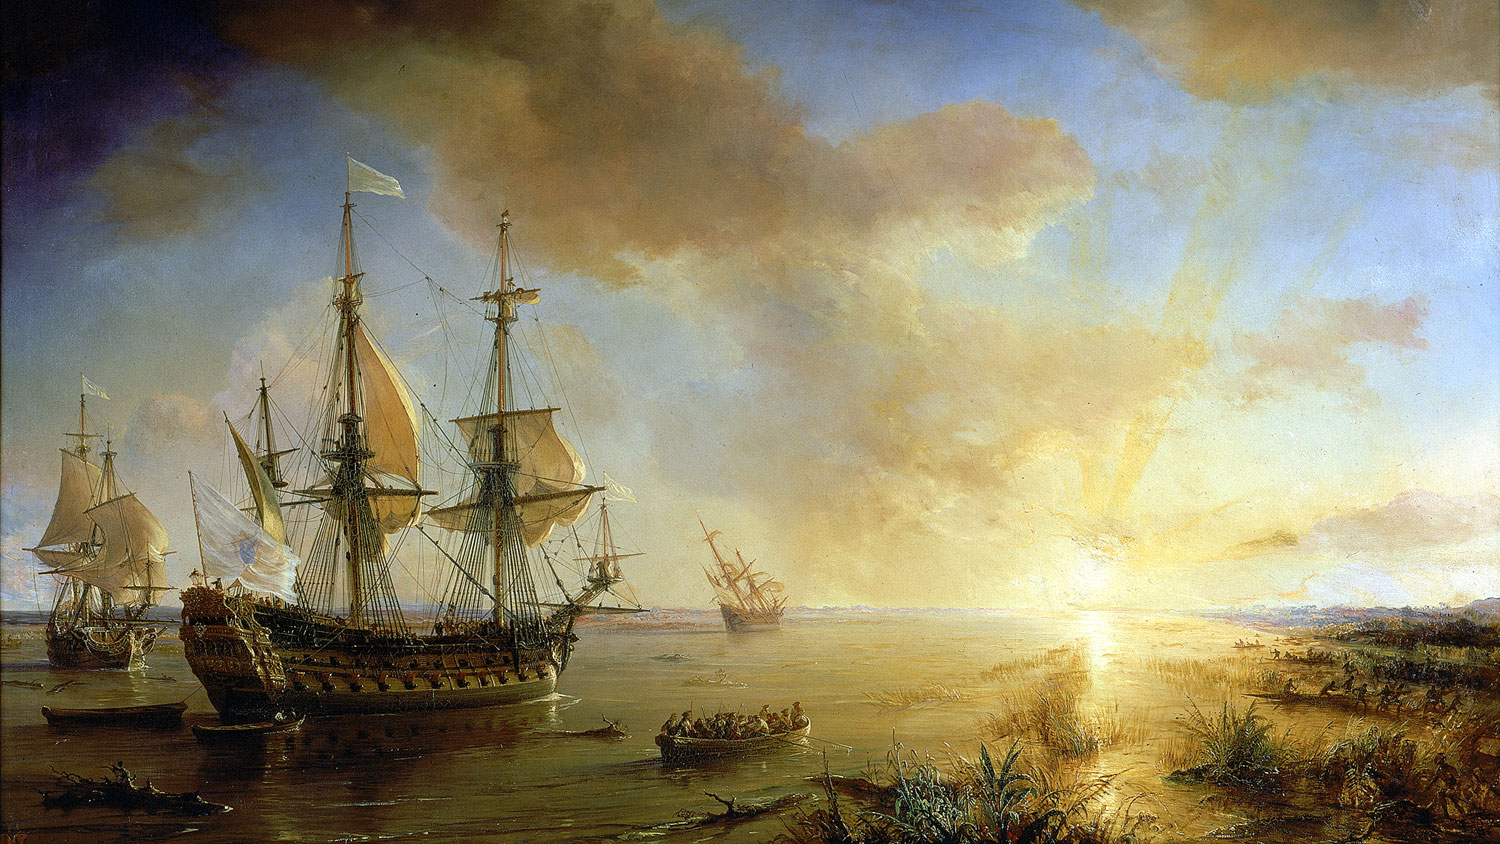 Painting of the La Belle ship